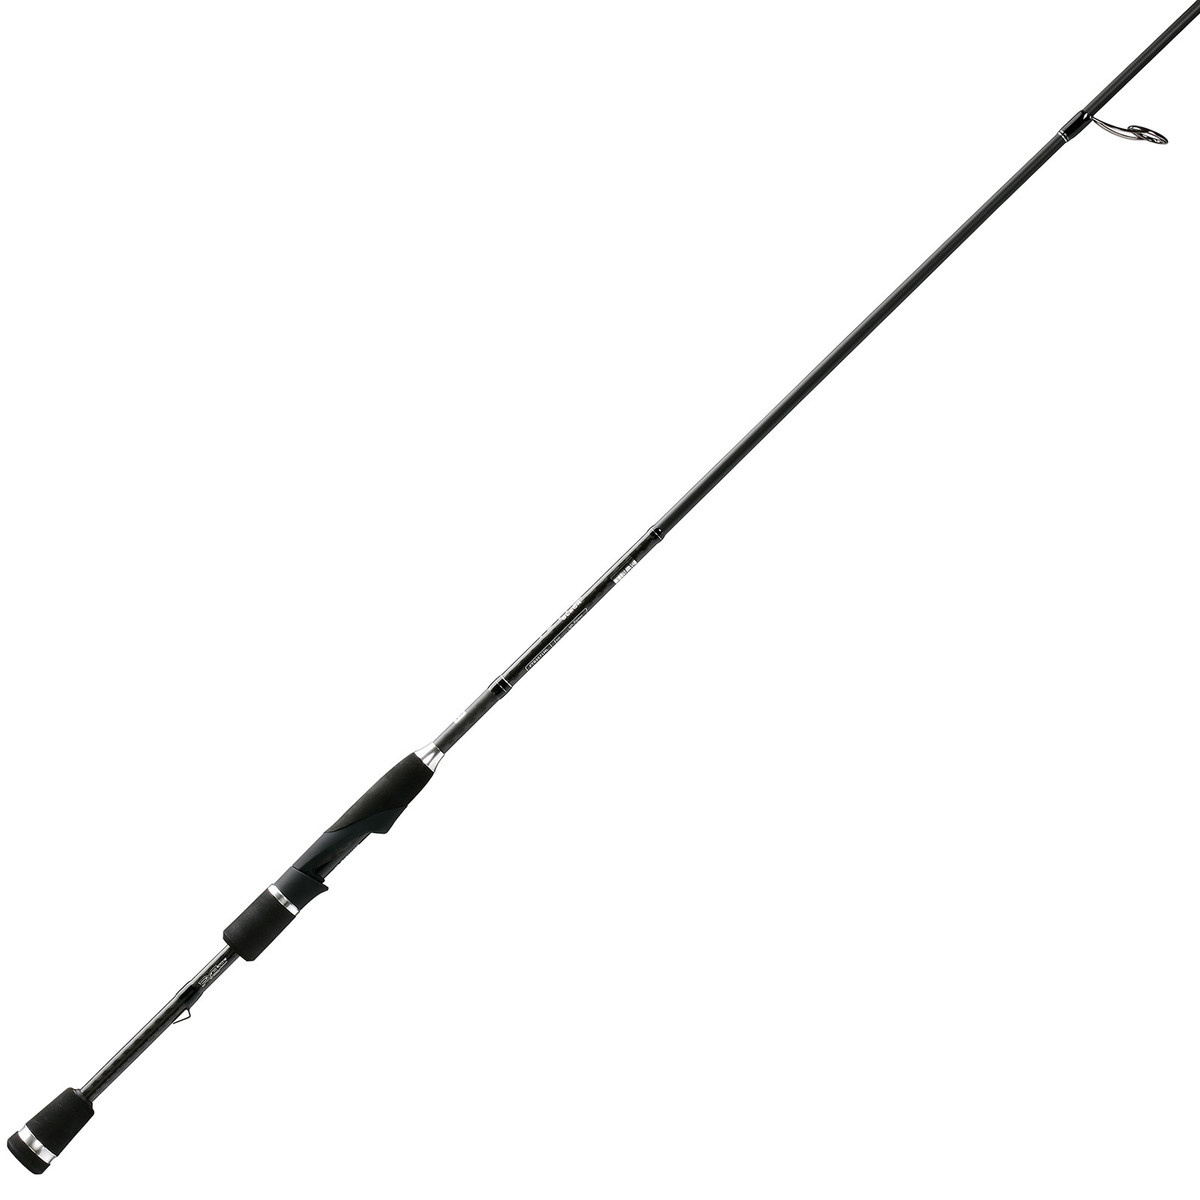 13 Fishing Fate V3 - 7'1 M Spinning Rod - 1PC